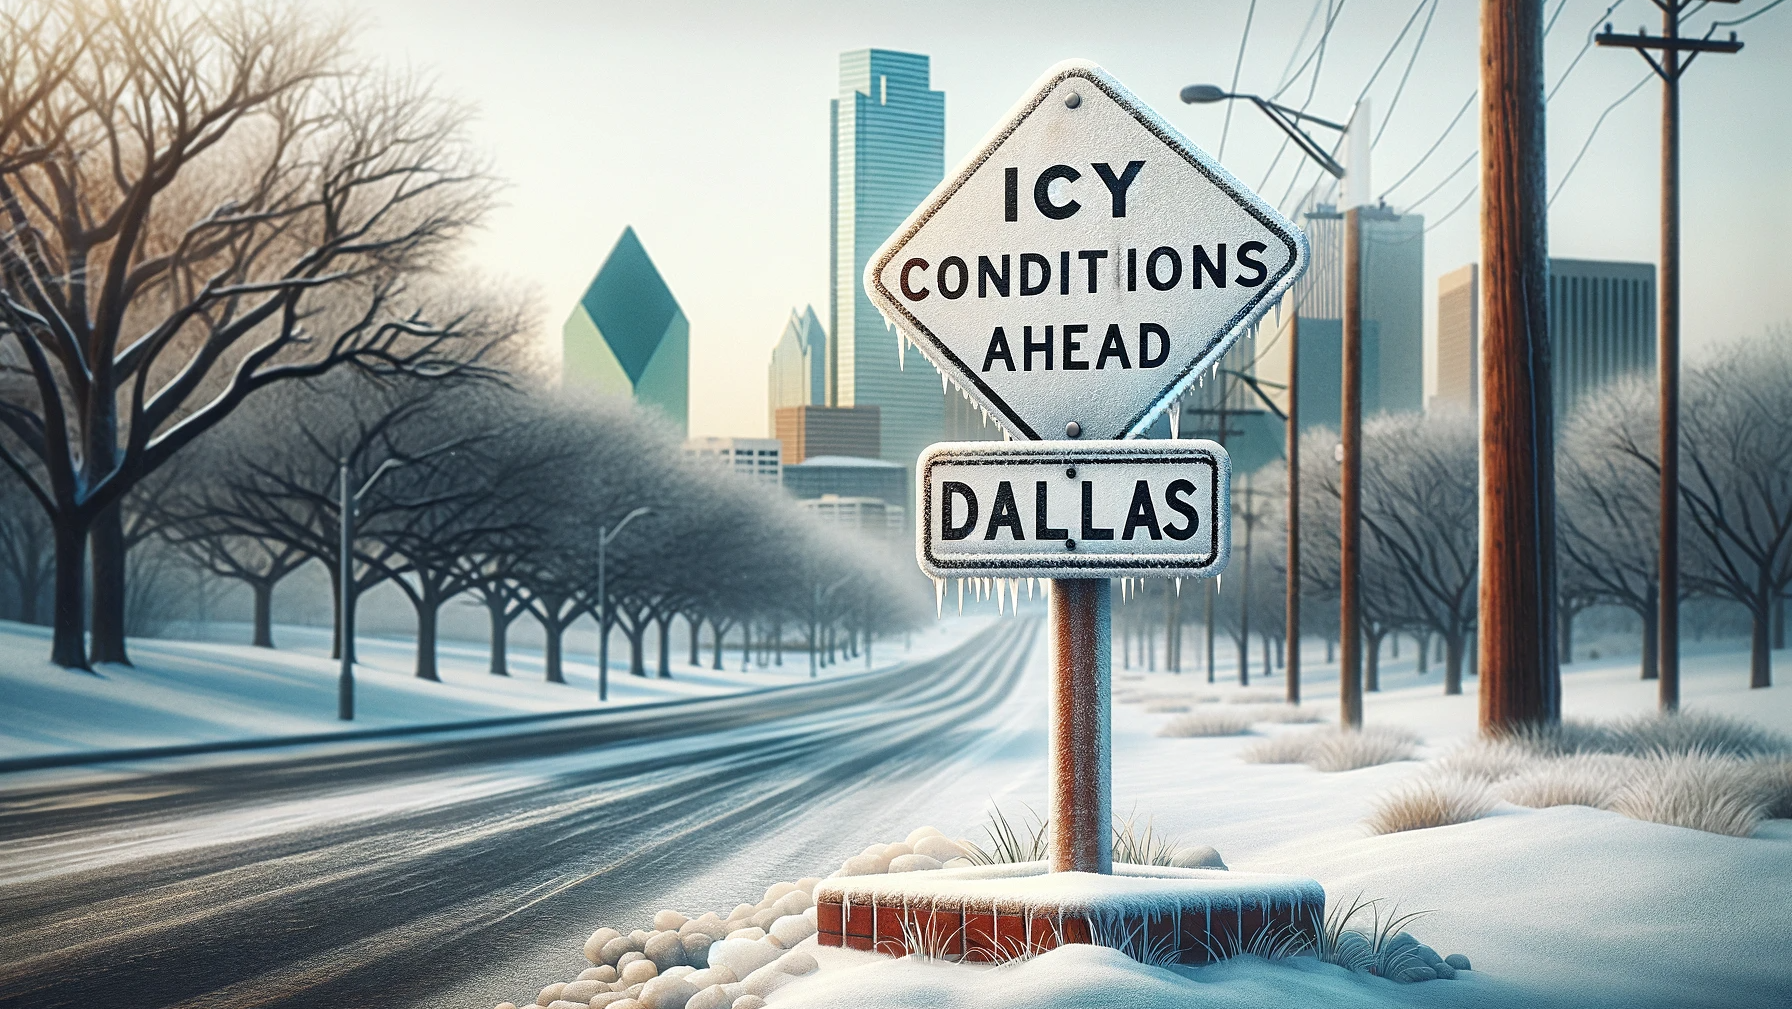 Dallas street sign warning of icy roads.